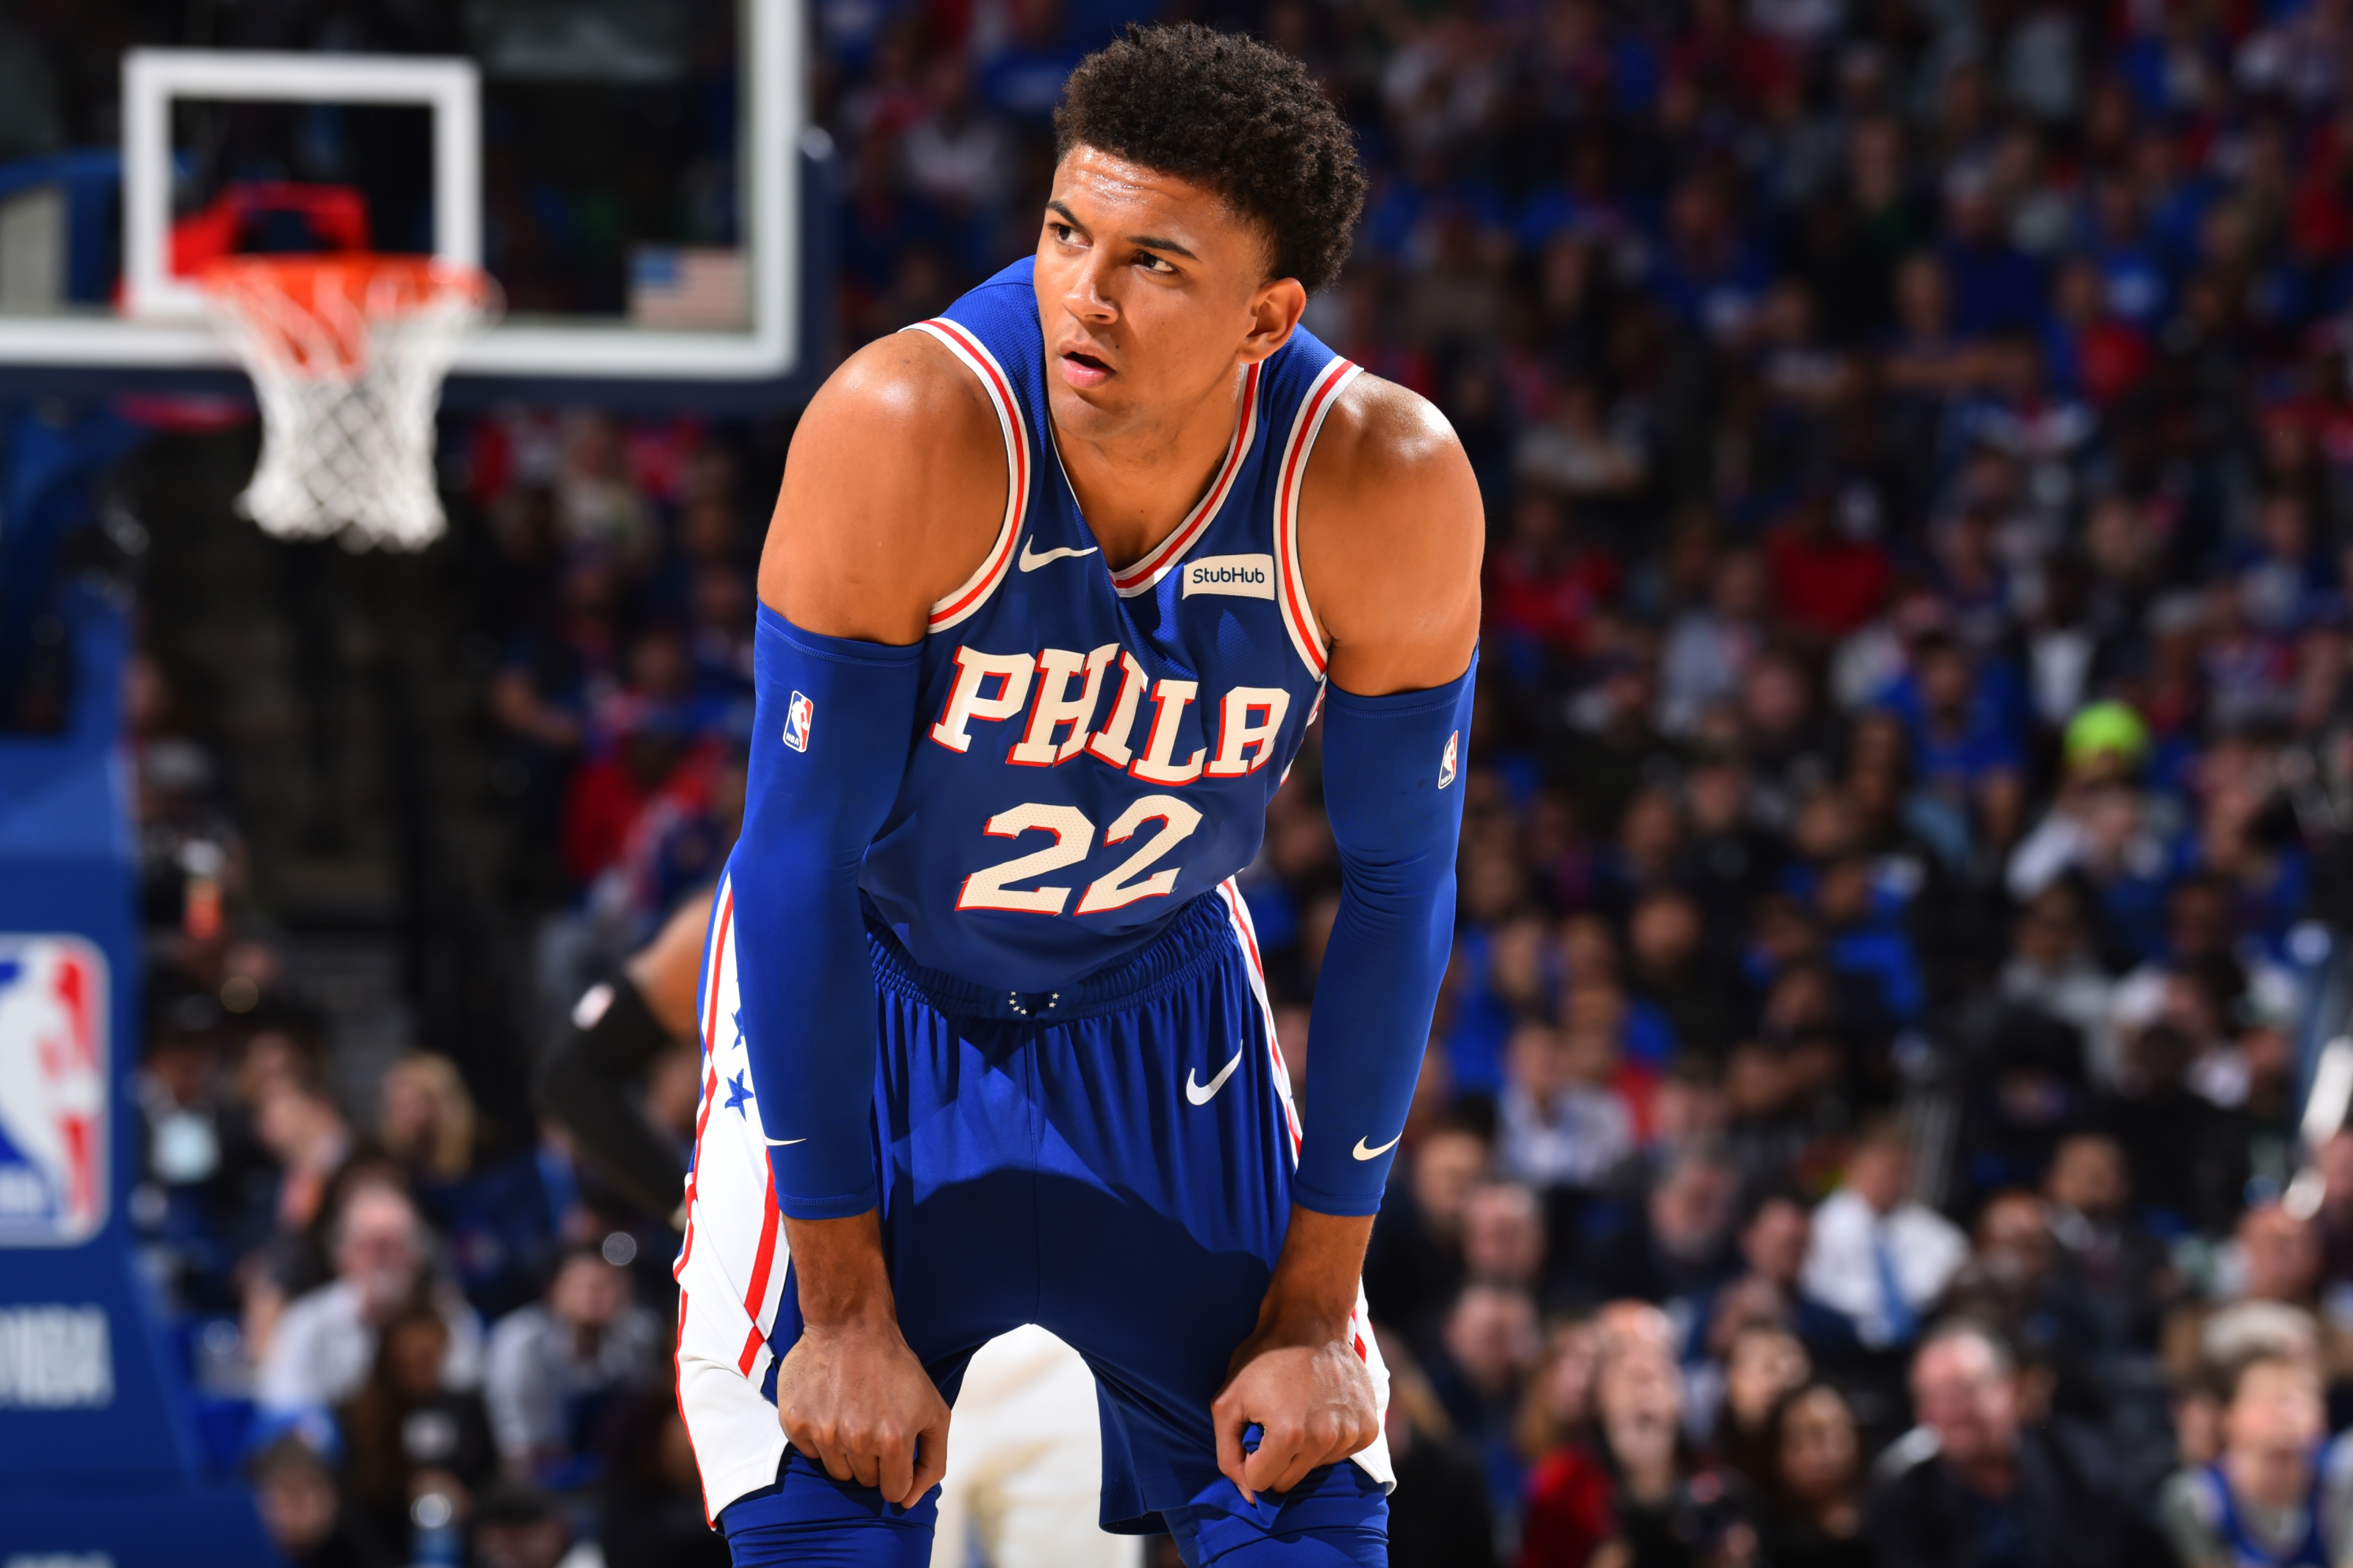 Sixers rookie Matisse Thybulle continues to impress on defense